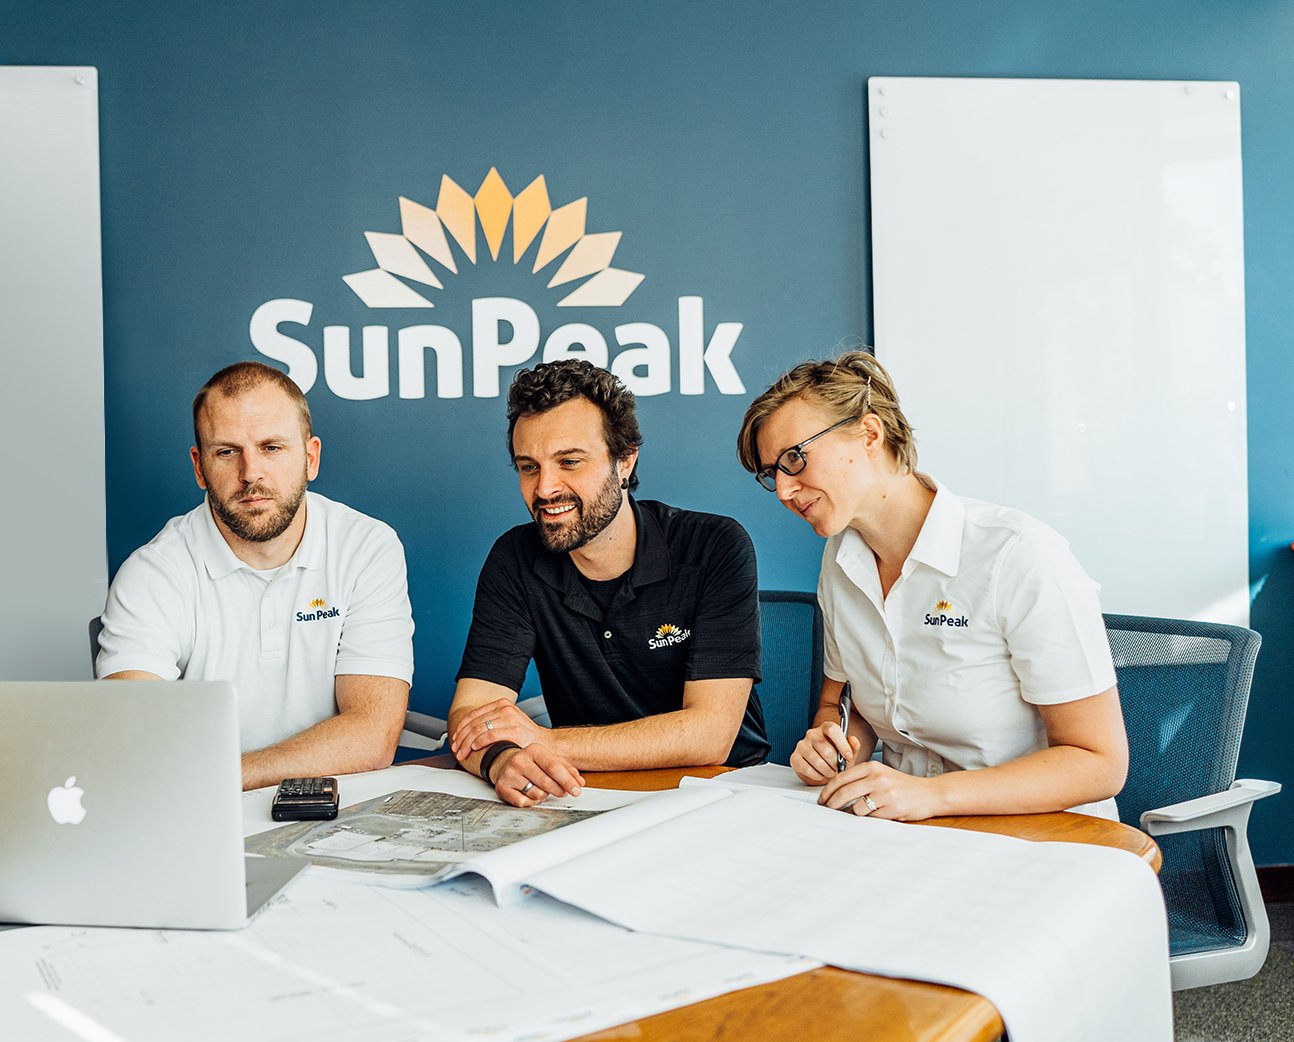 The SunPeak design team in the office, representing SunPeak’s work as an award-winning commercial solar installation company.